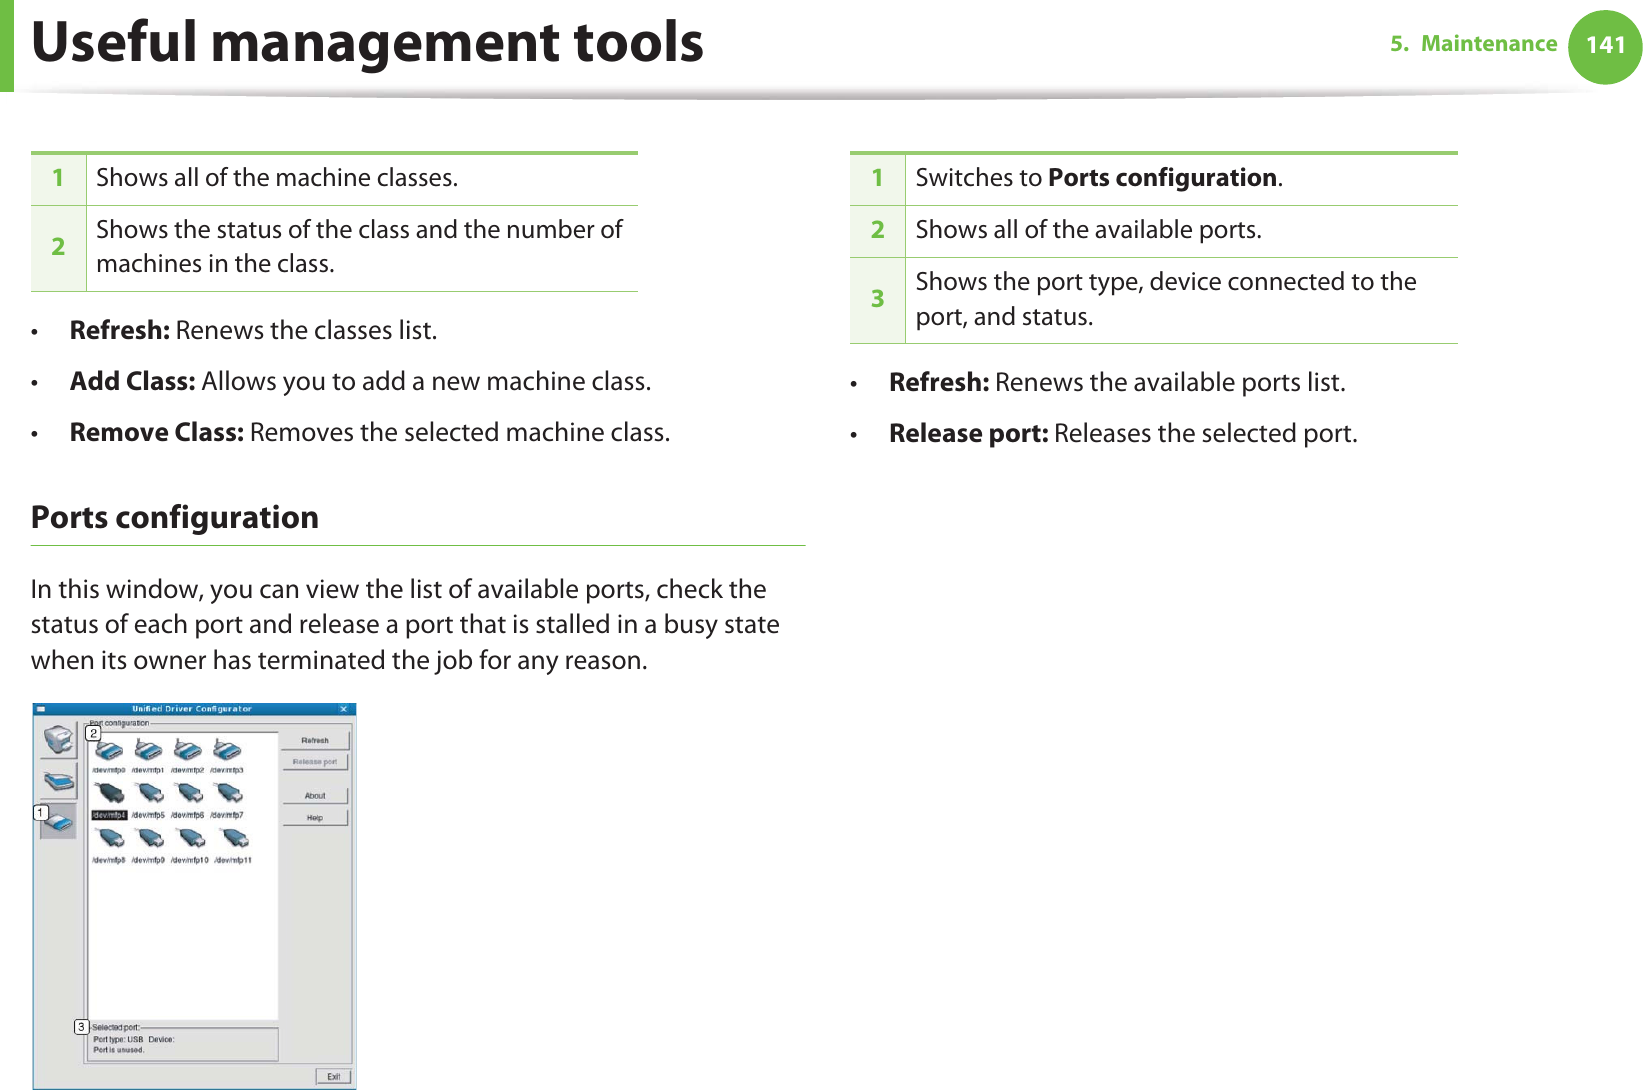 Useful management tools 1415. Maintenance•Refresh: Renews the classes list.•Add Class: Allows you to add a new machine class.•Remove Class: Removes the selected machine class.Ports configurationIn this window, you can view the list of available ports, check the status of each port and release a port that is stalled in a busy state when its owner has terminated the job for any reason.•Refresh: Renews the available ports list.•Release port: Releases the selected port.1Shows all of the machine classes.2Shows the status of the class and the number of machines in the class.1Switches to Ports configuration.2Shows all of the available ports.3Shows the port type, device connected to the port, and status.